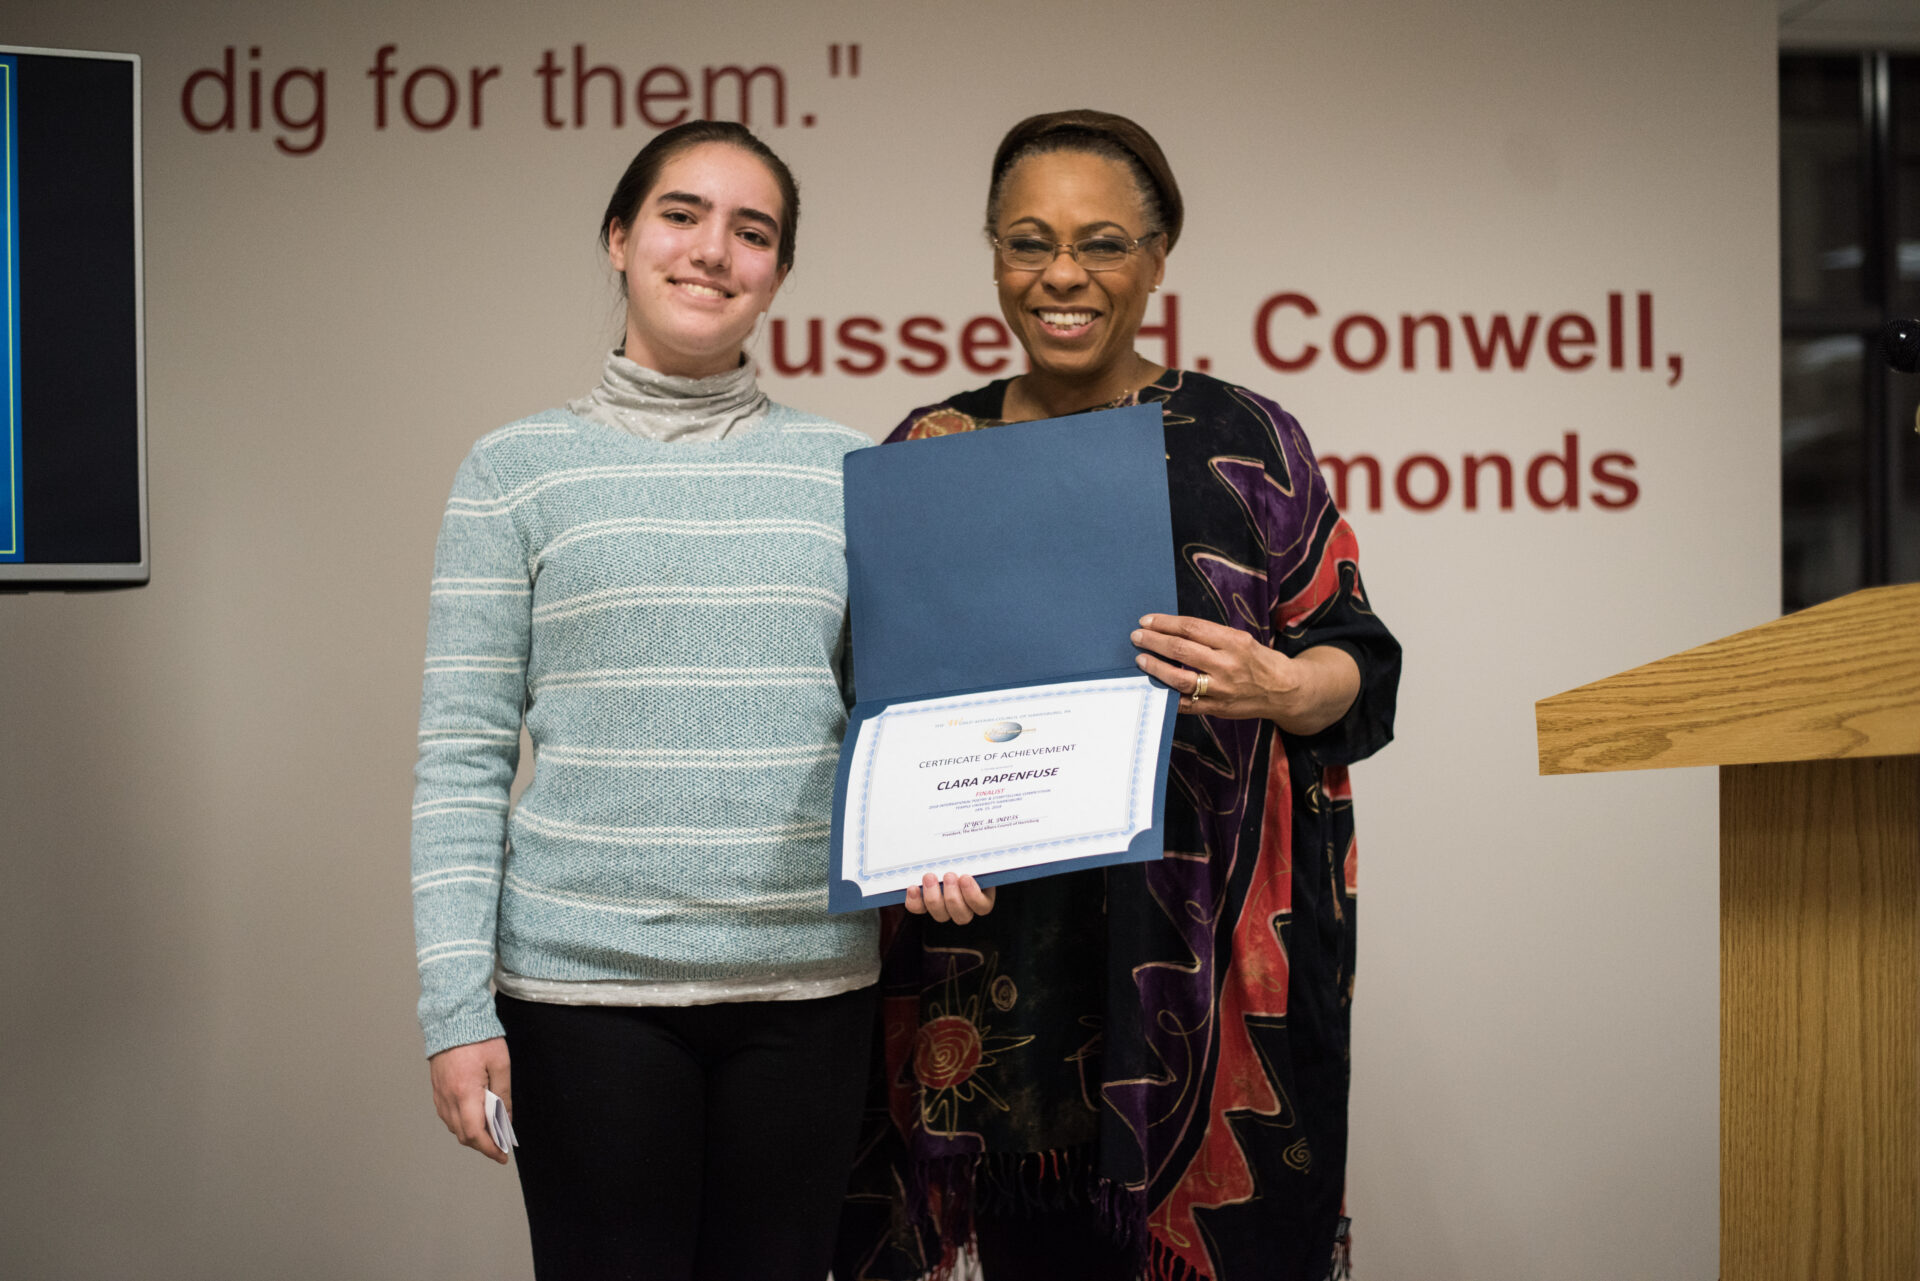 Clara Papenfuse receives her Finalist certificate in the 2018 International Poetry & Storytelling Competition.